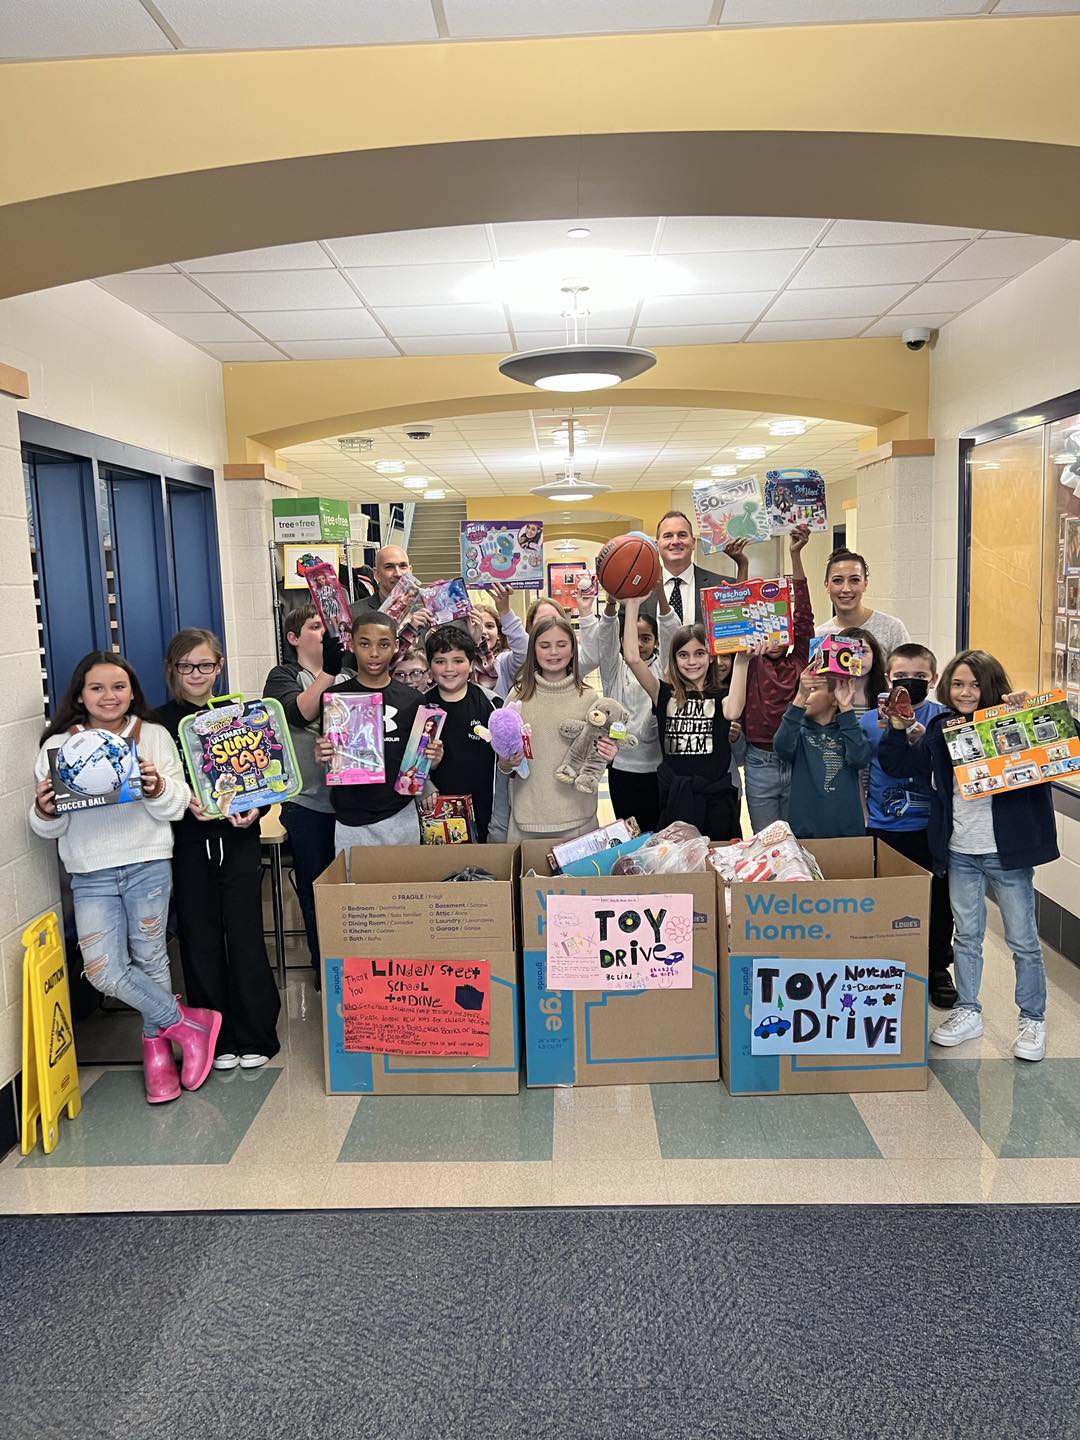 Elementary school students collecting toys for toy drive